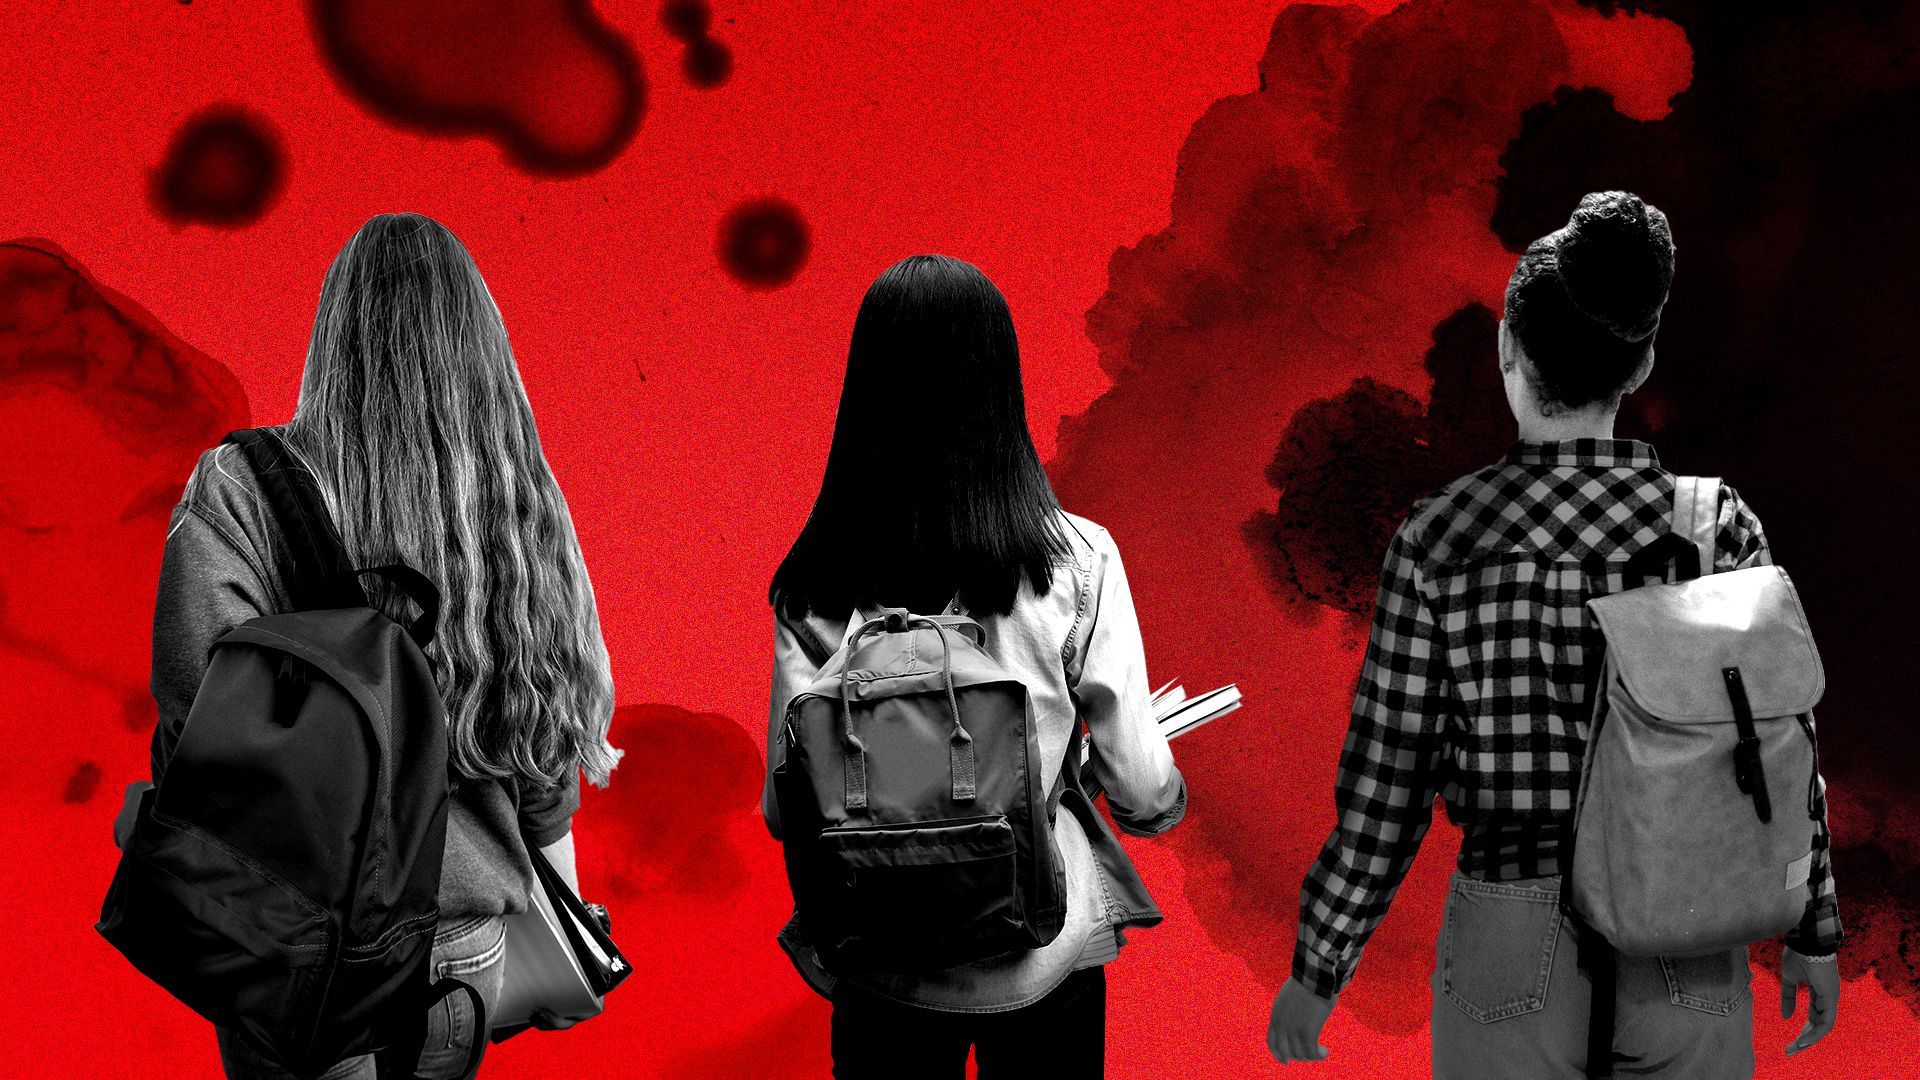 Illustration of three teen girls wearing backpacks facing away towards a dark red, ink stained background